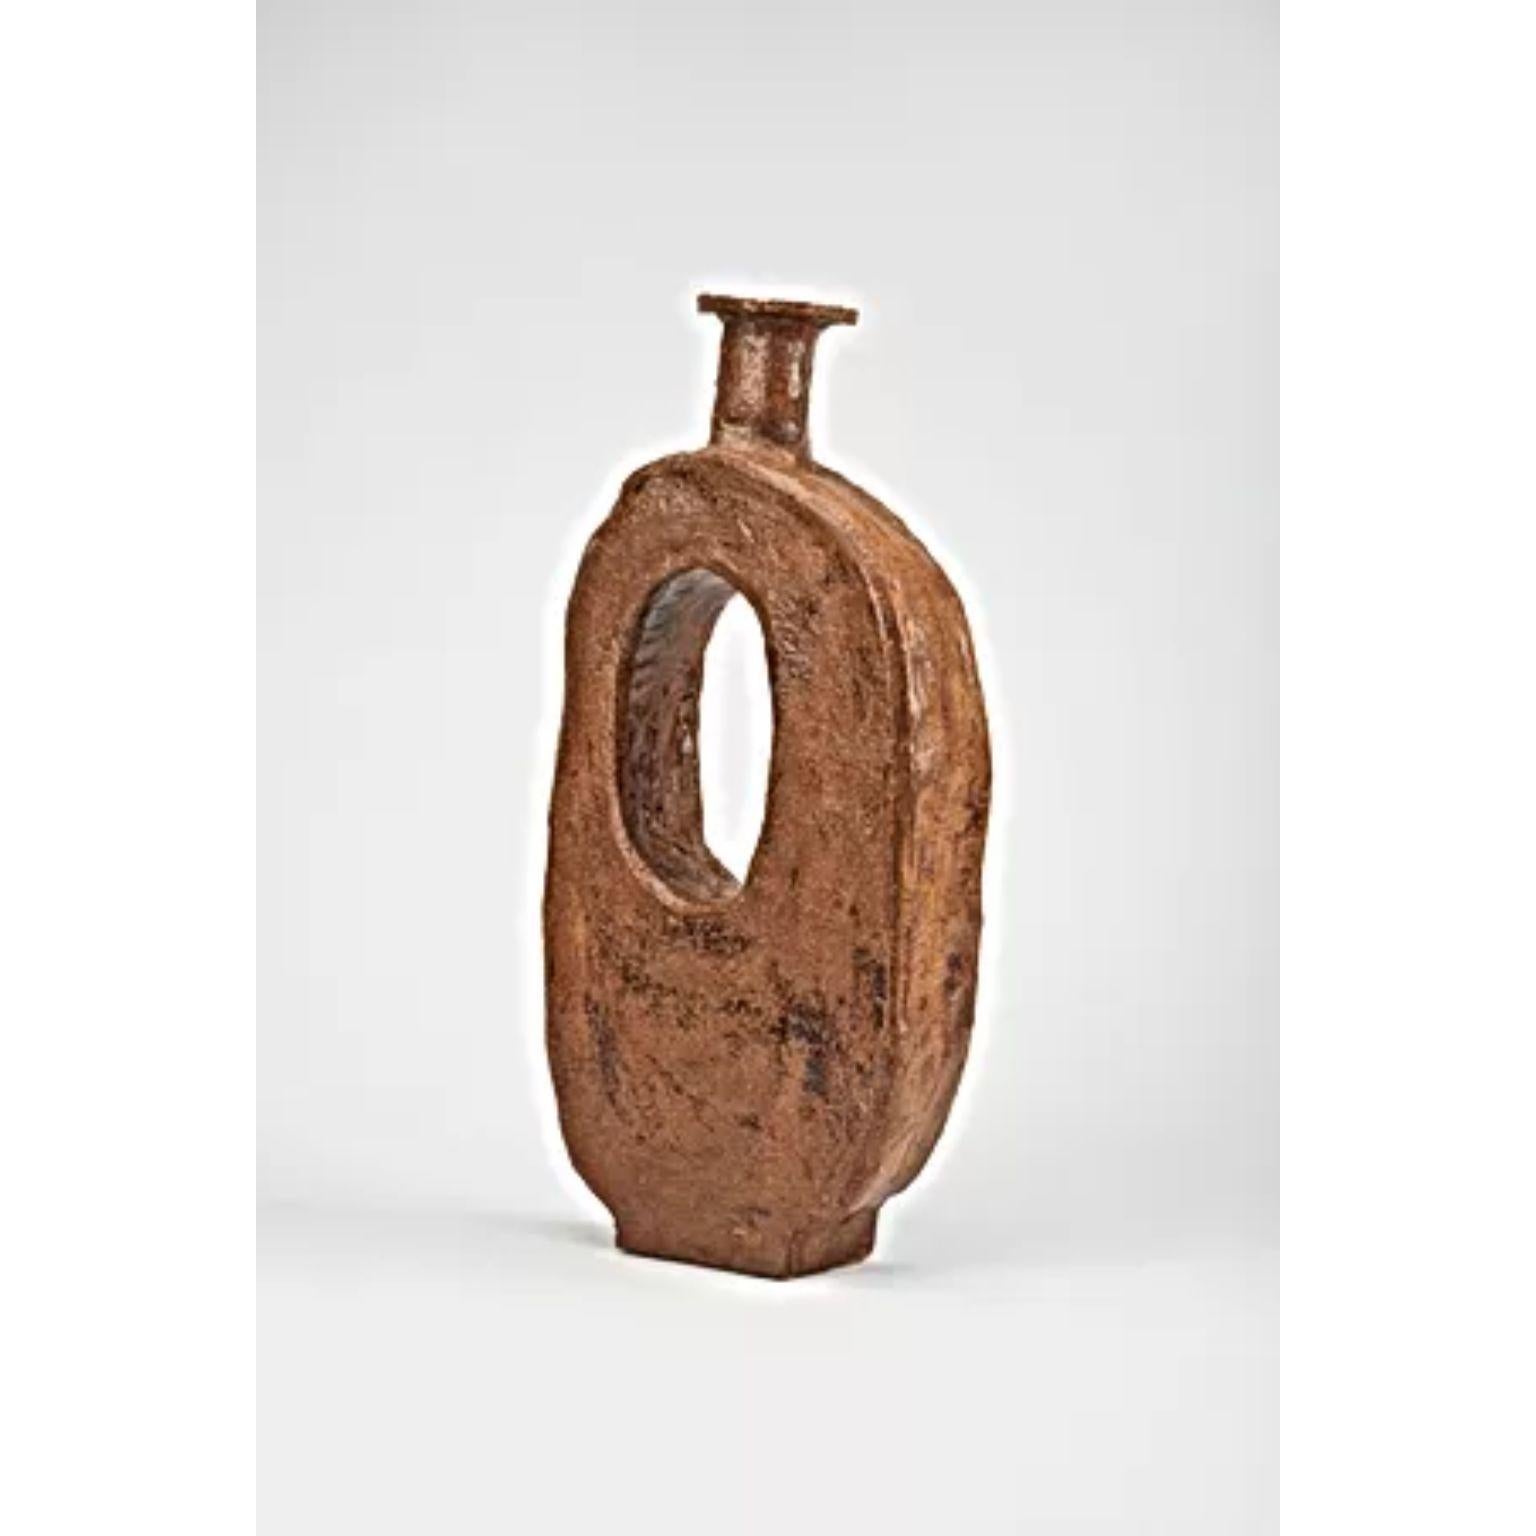 Taju Large Vase by Willem Van Hooff.
Dimensions: W 40 x D 10 x H 58 cm (Dimensions may vary as pieces are hand-made and might present slight variations in sizes)
Materials: Earthenware, ceramic, pigments and glaze

Willem van Hooff is a designer